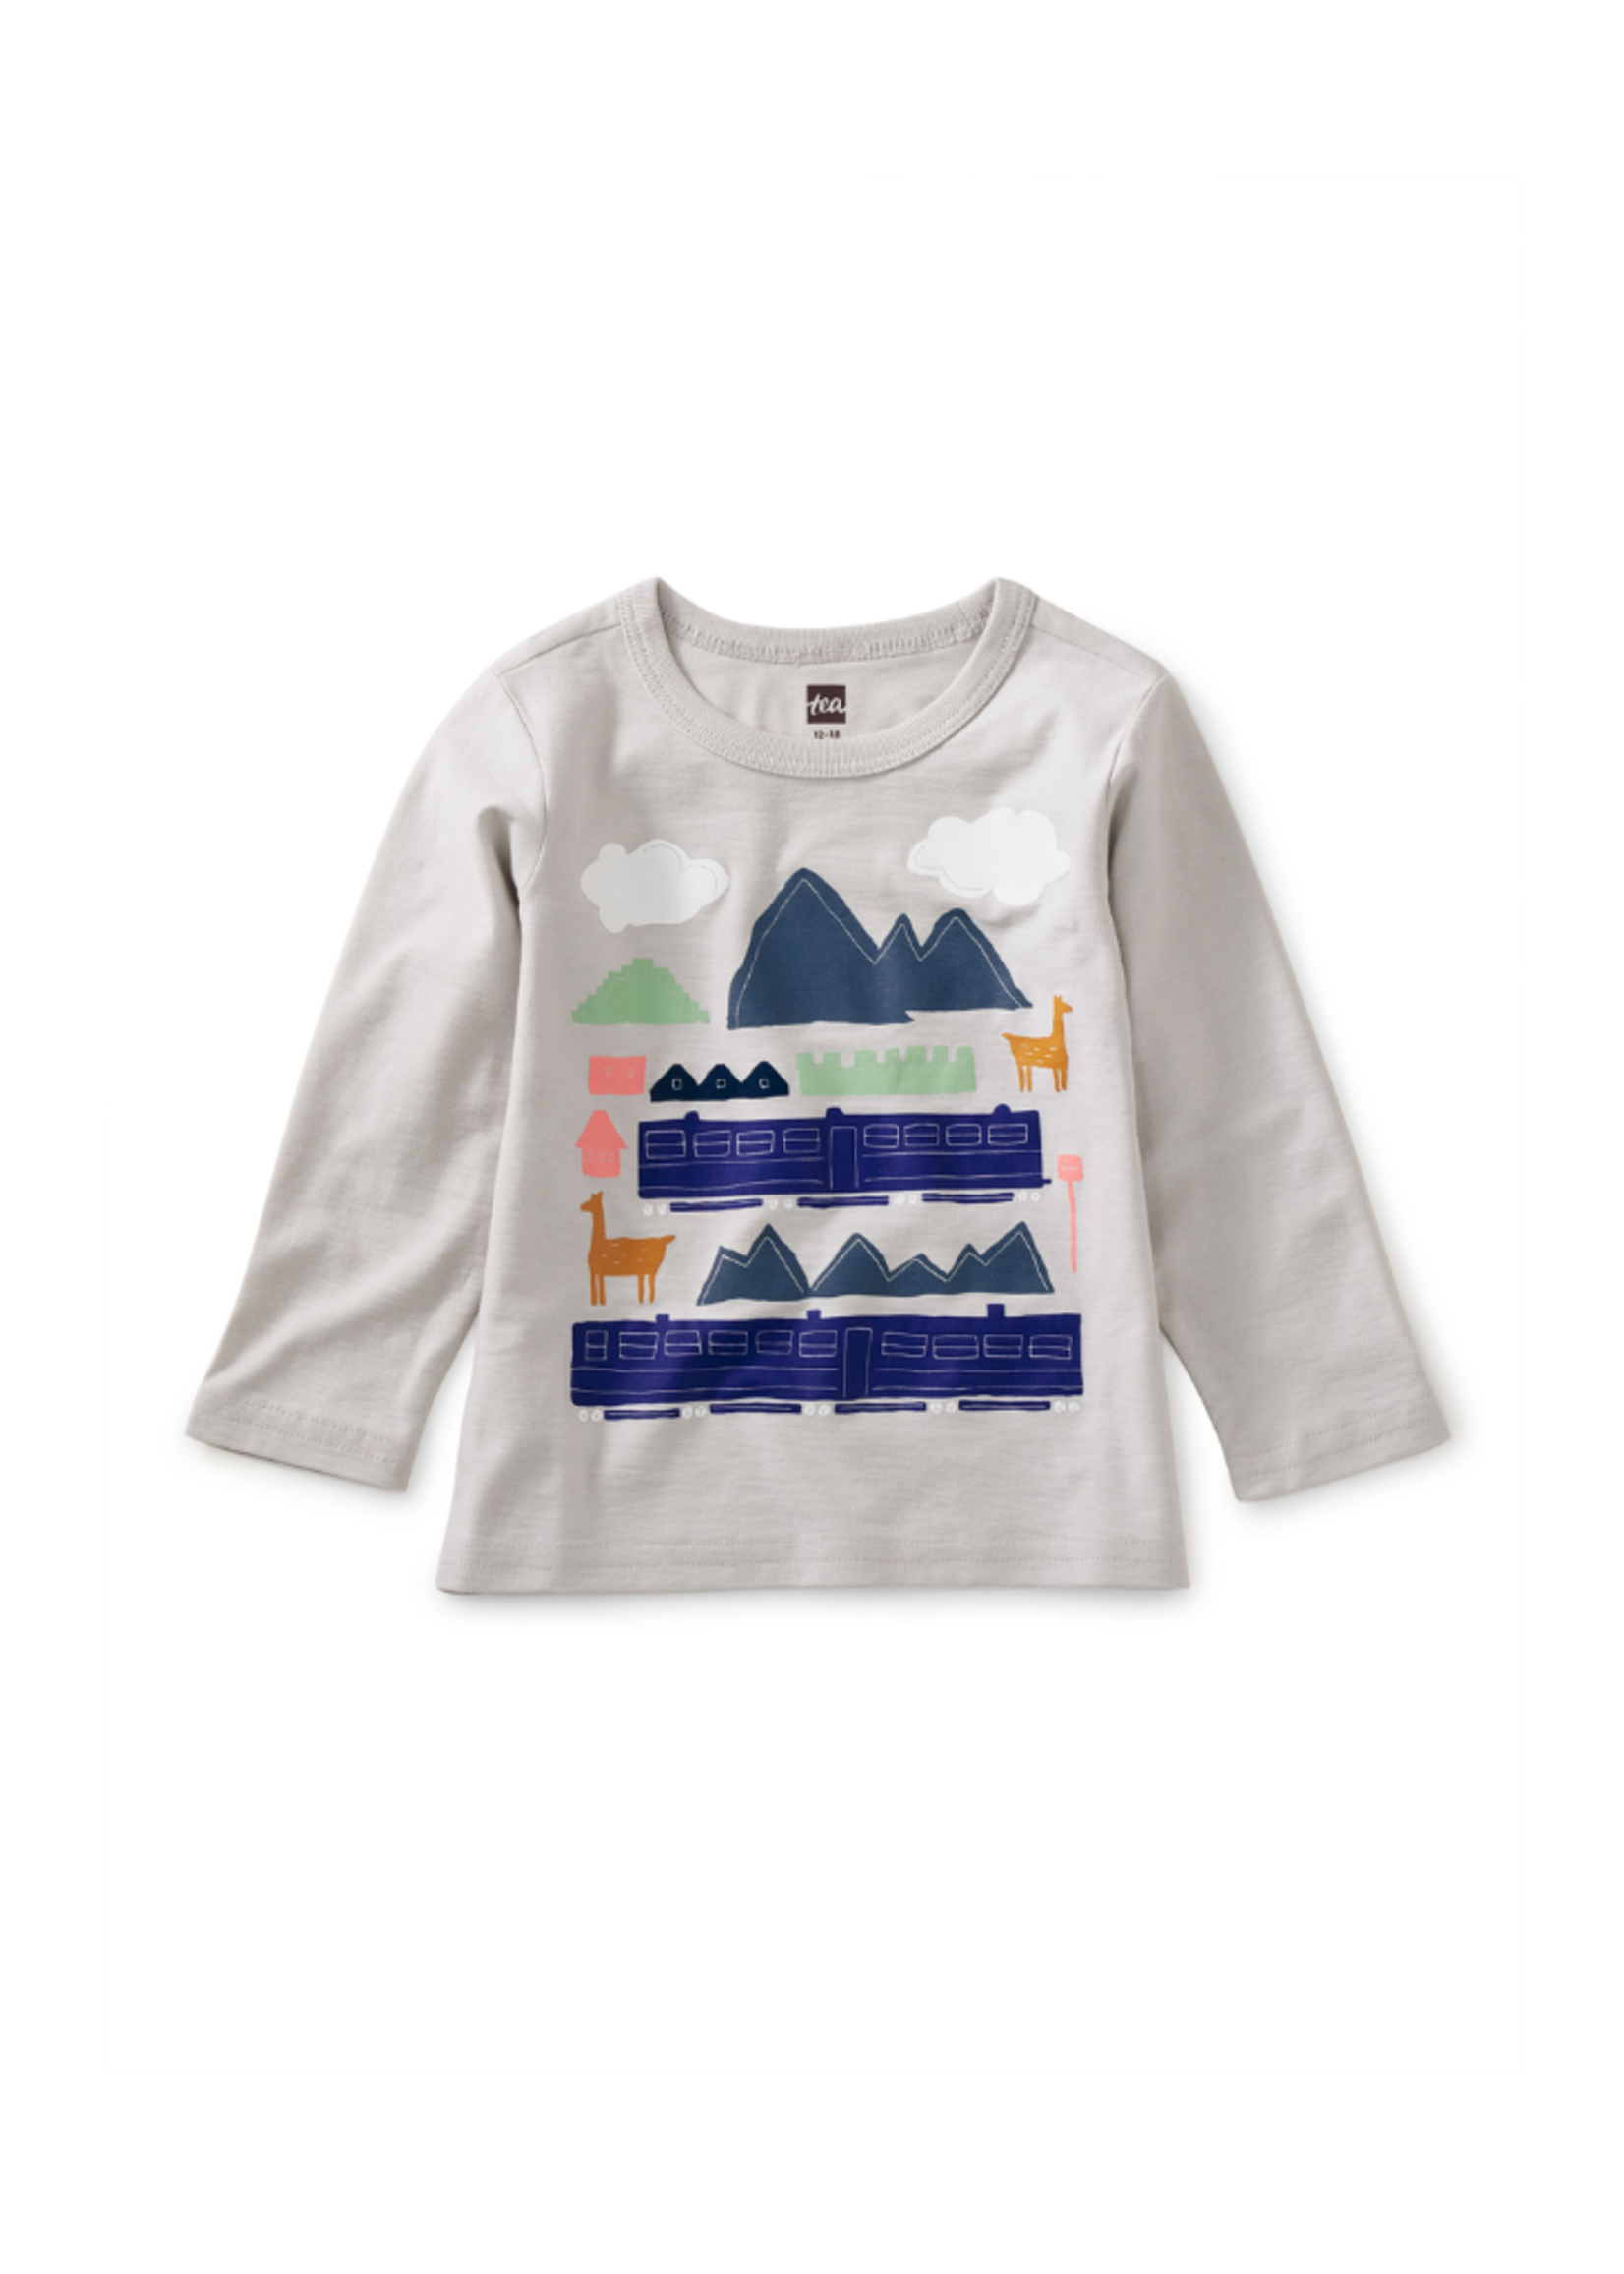 Tea Collection Train Journey Baby Graphic Tee